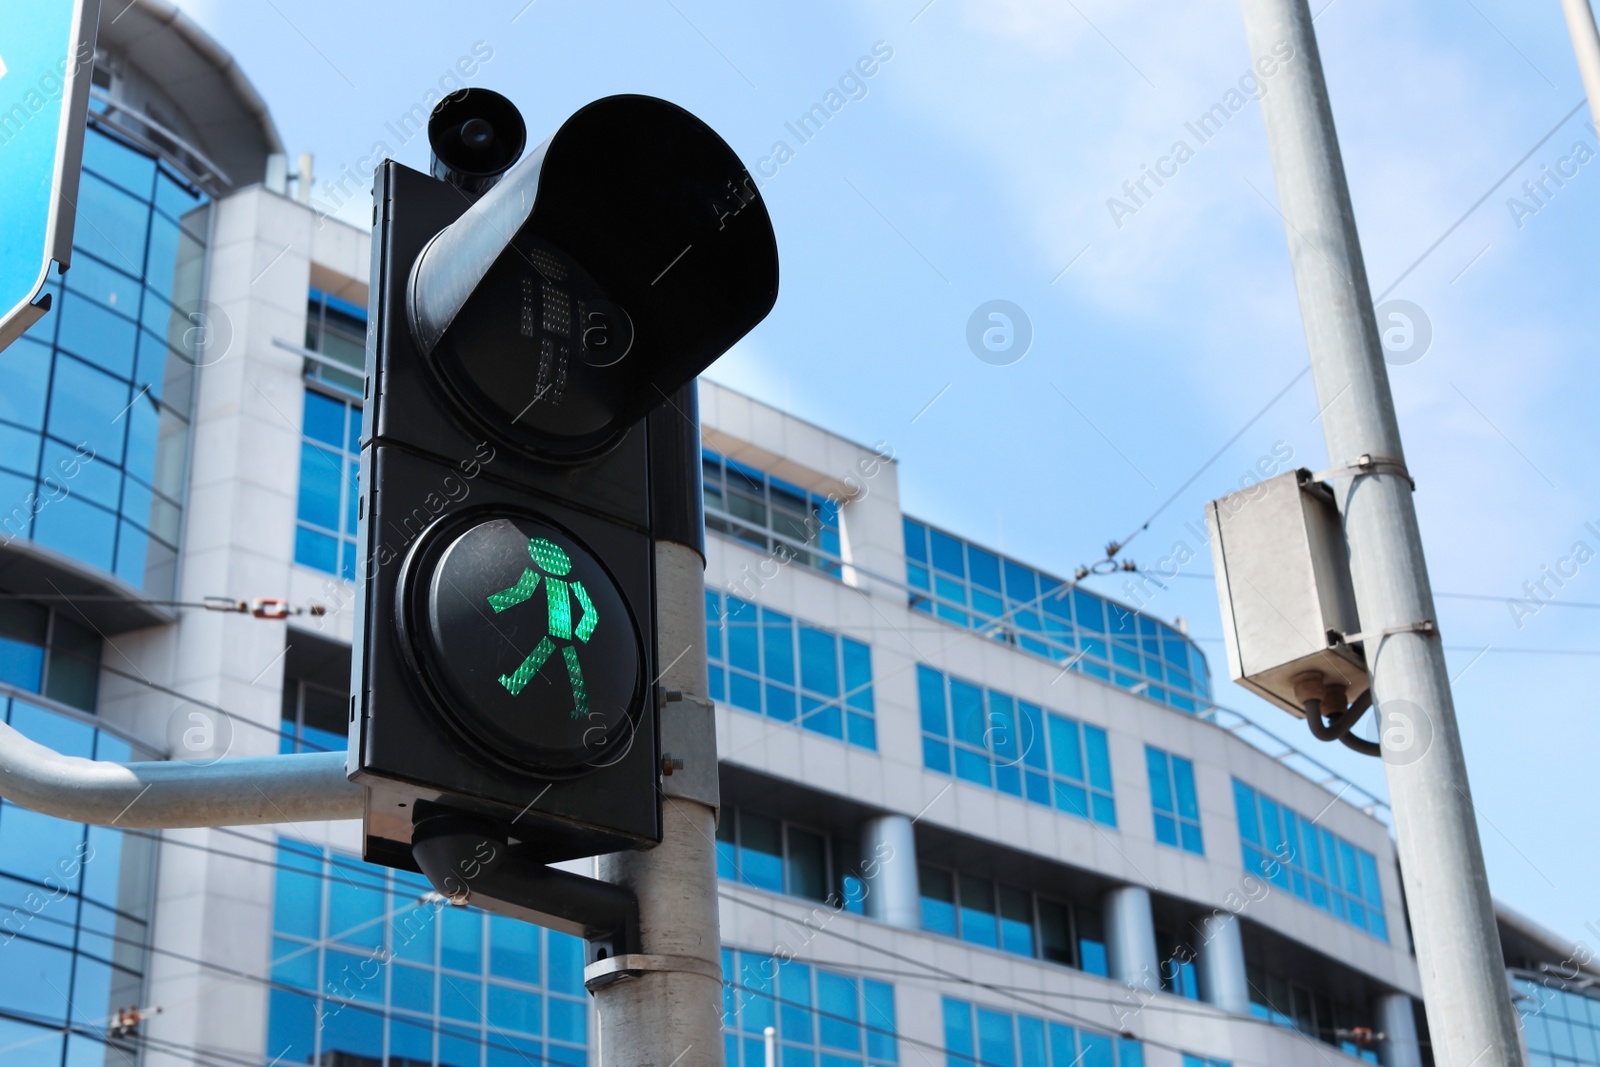 Photo of Traffic light with green signal on city street